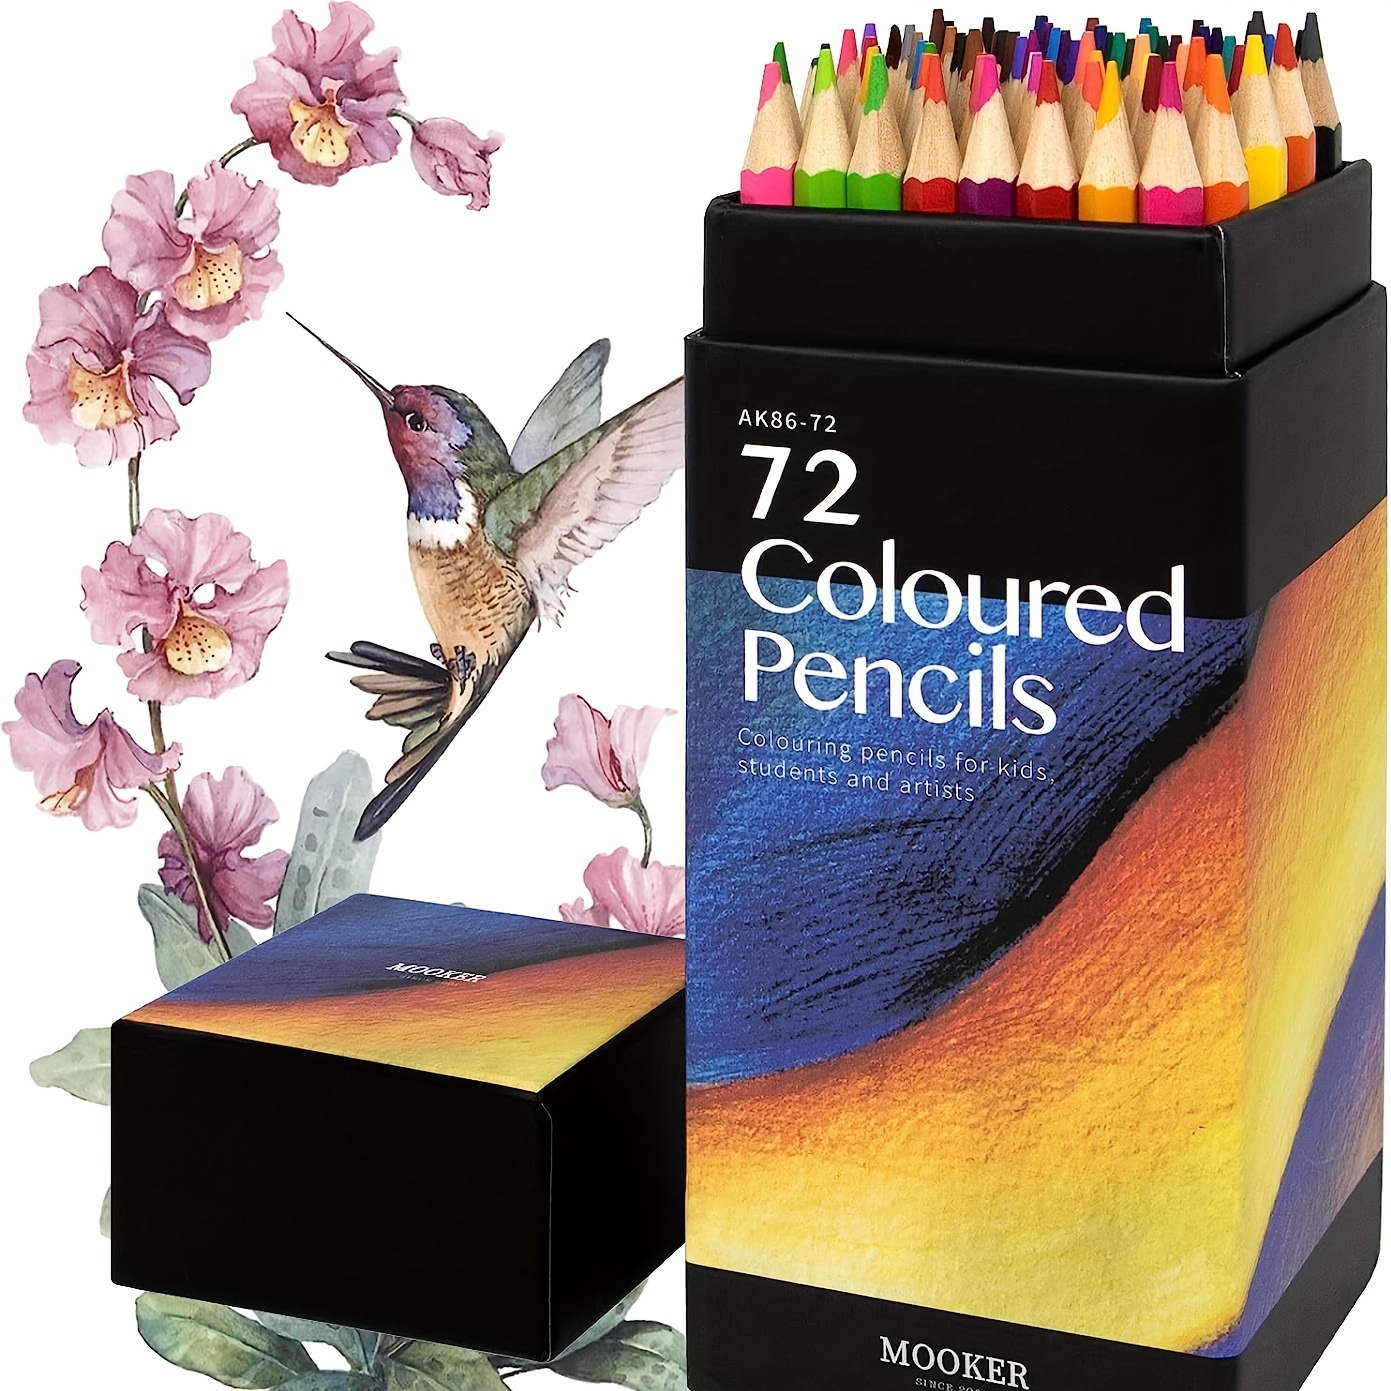 96Pack Drawing Sketching Coloring Set,Include 72Professional Soft Core  Colored Pencils,Sketch & Charcoal Pencils,Sketchbook,Art Drawing Supplies  For A